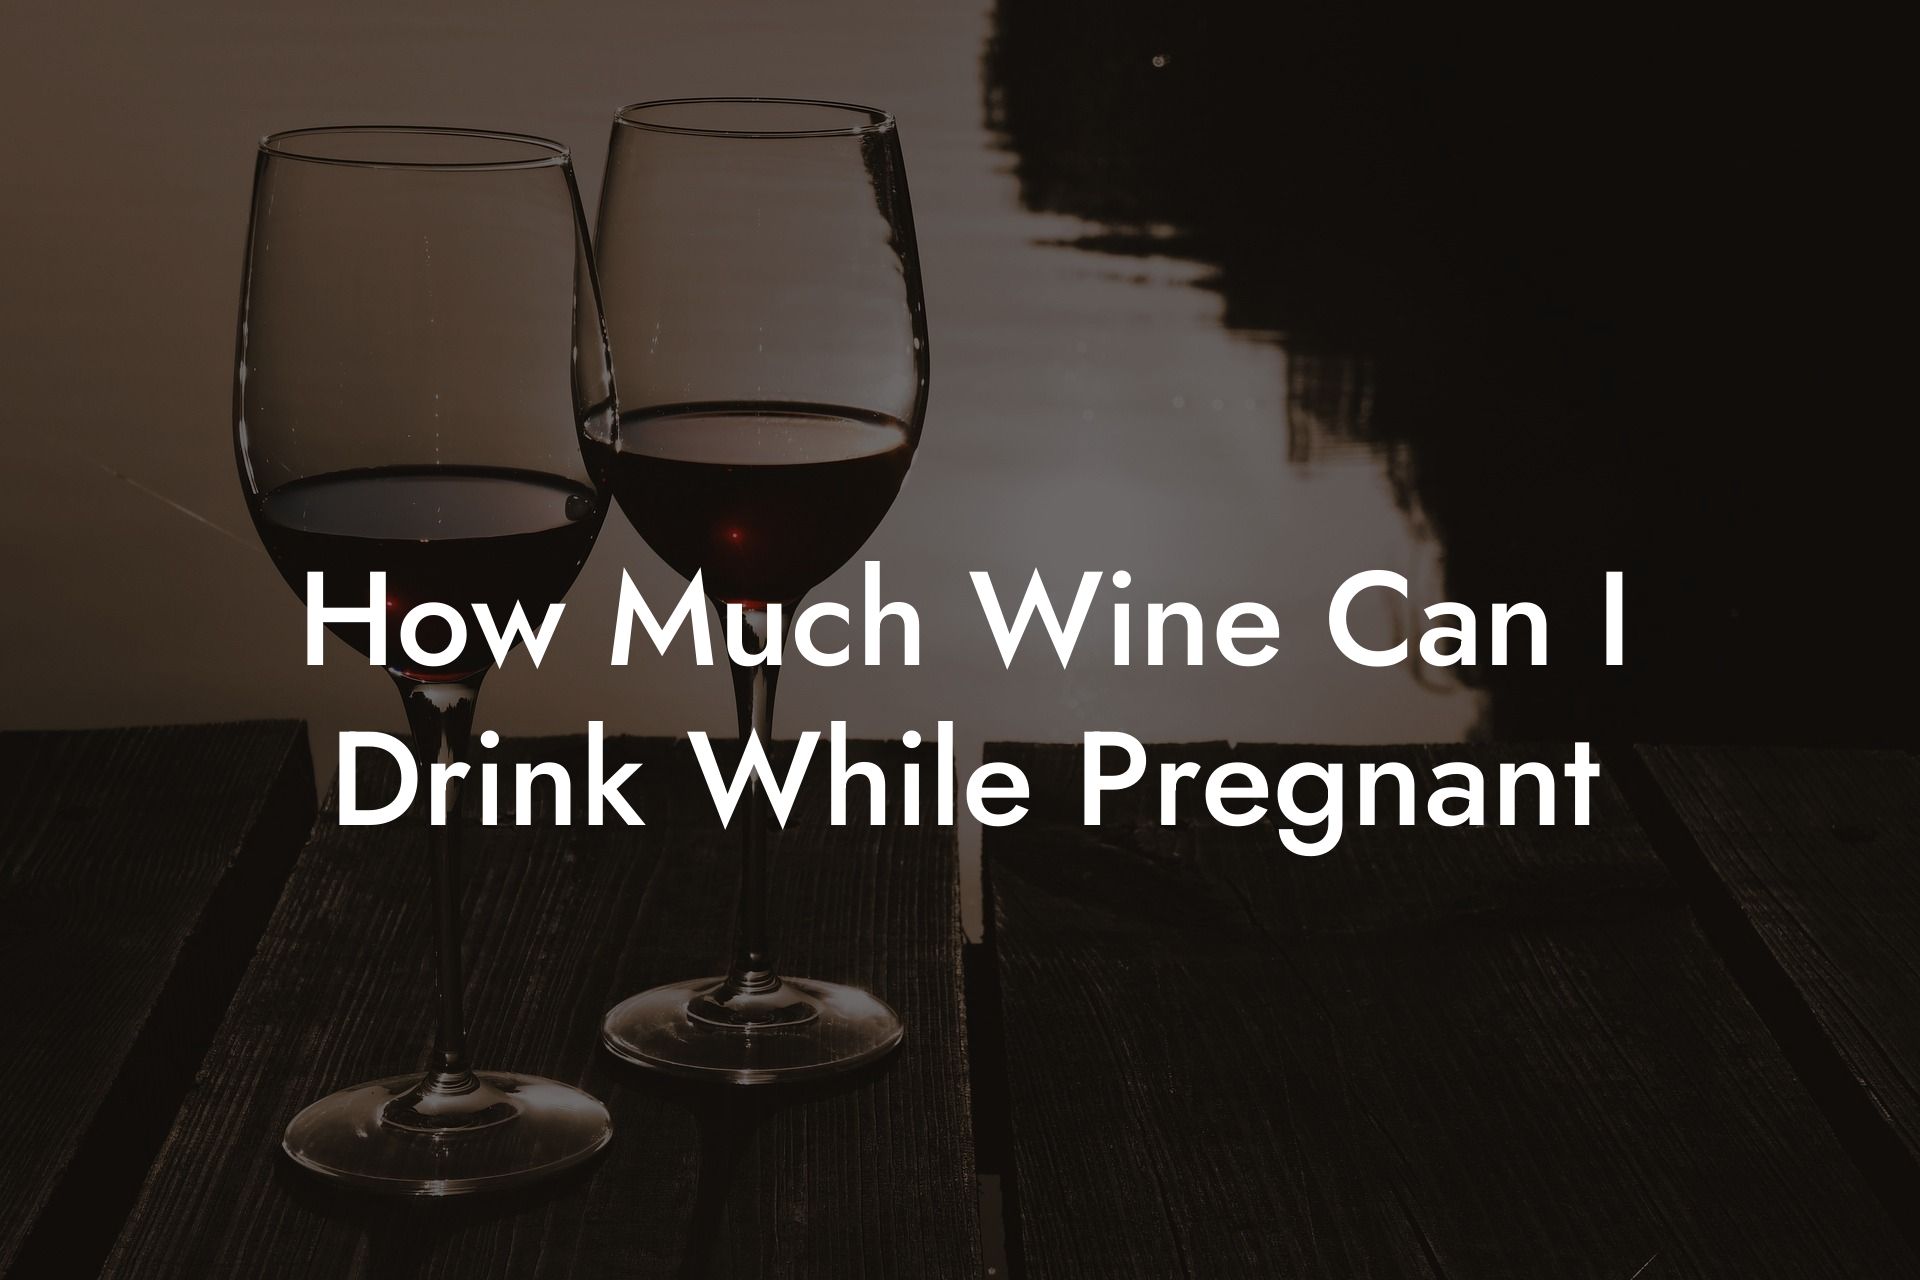 How Much Wine Can I Drink While Pregnant